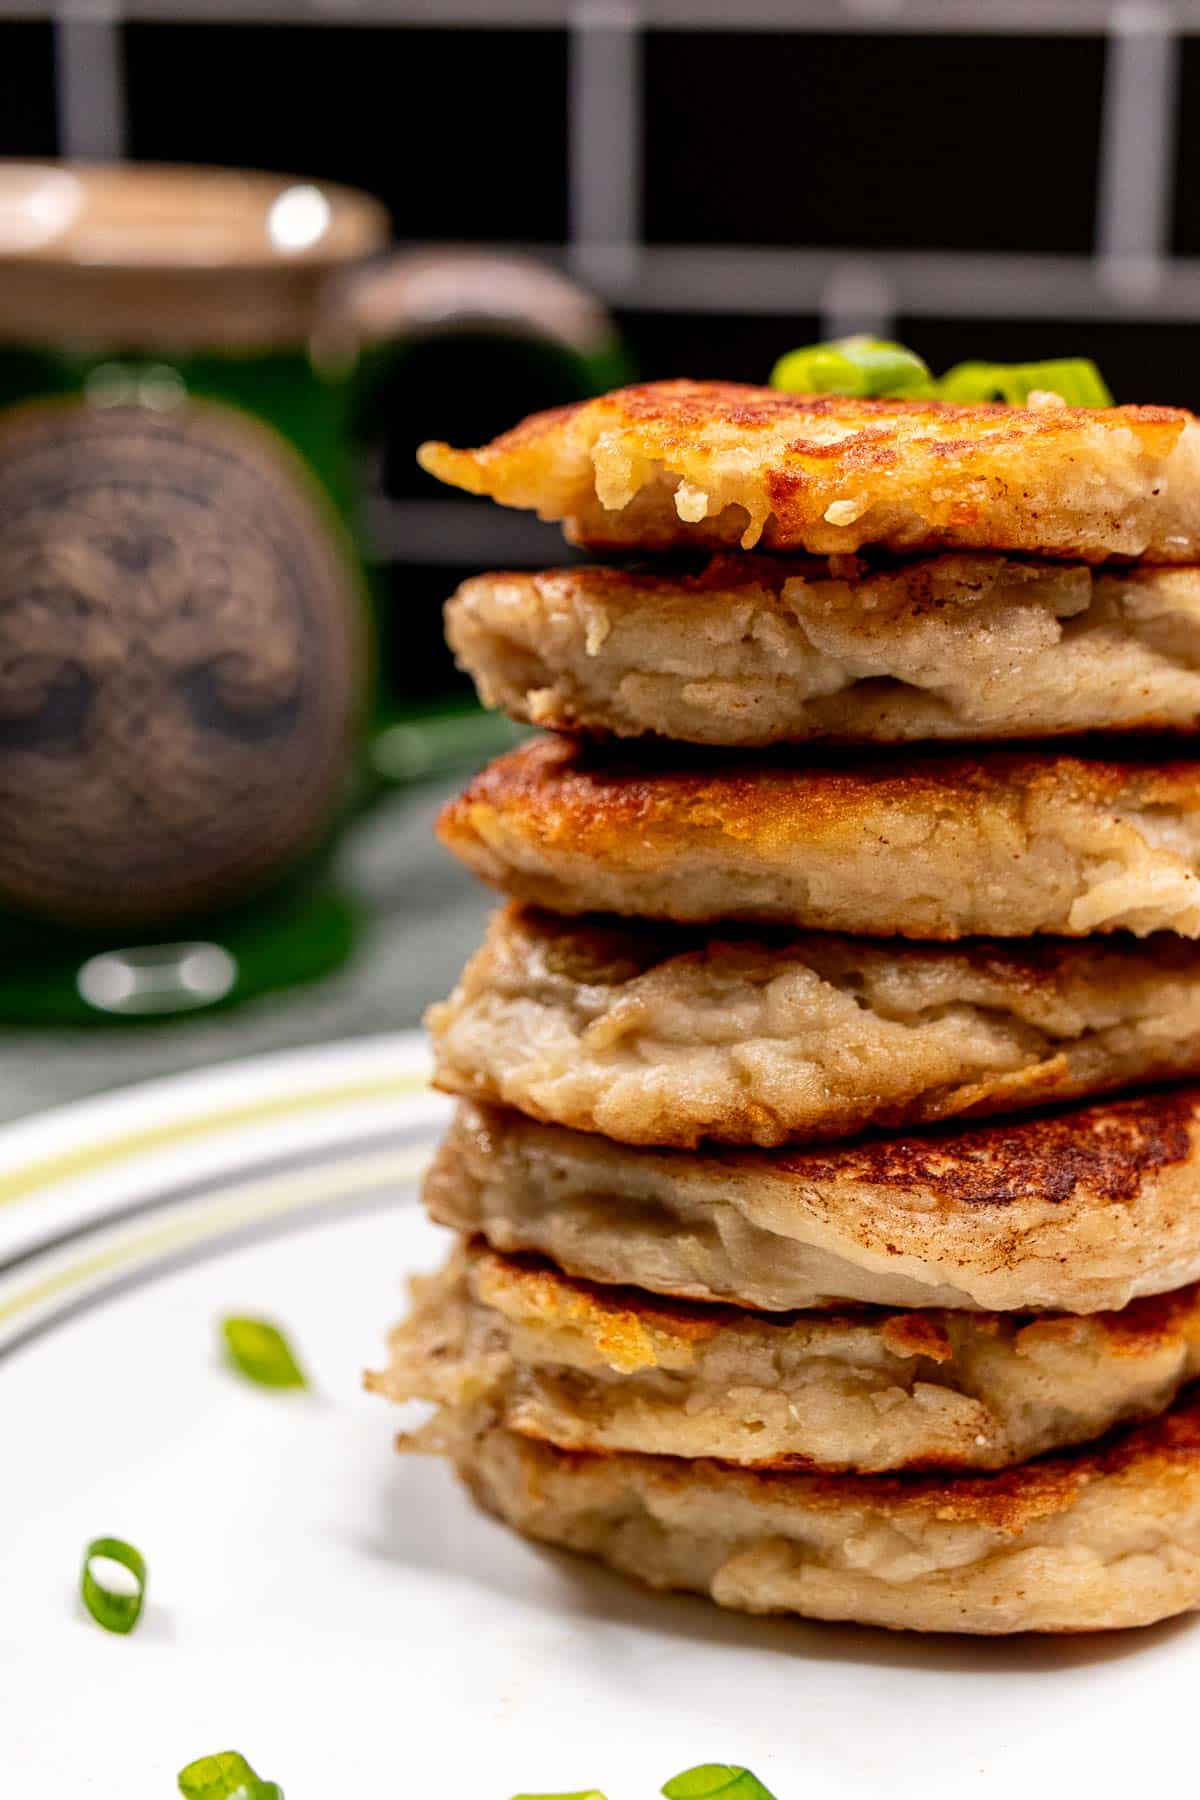 Seven boxty potato pancakes stacked on top of one another on a plate, with a green Irish teacup behind  them.